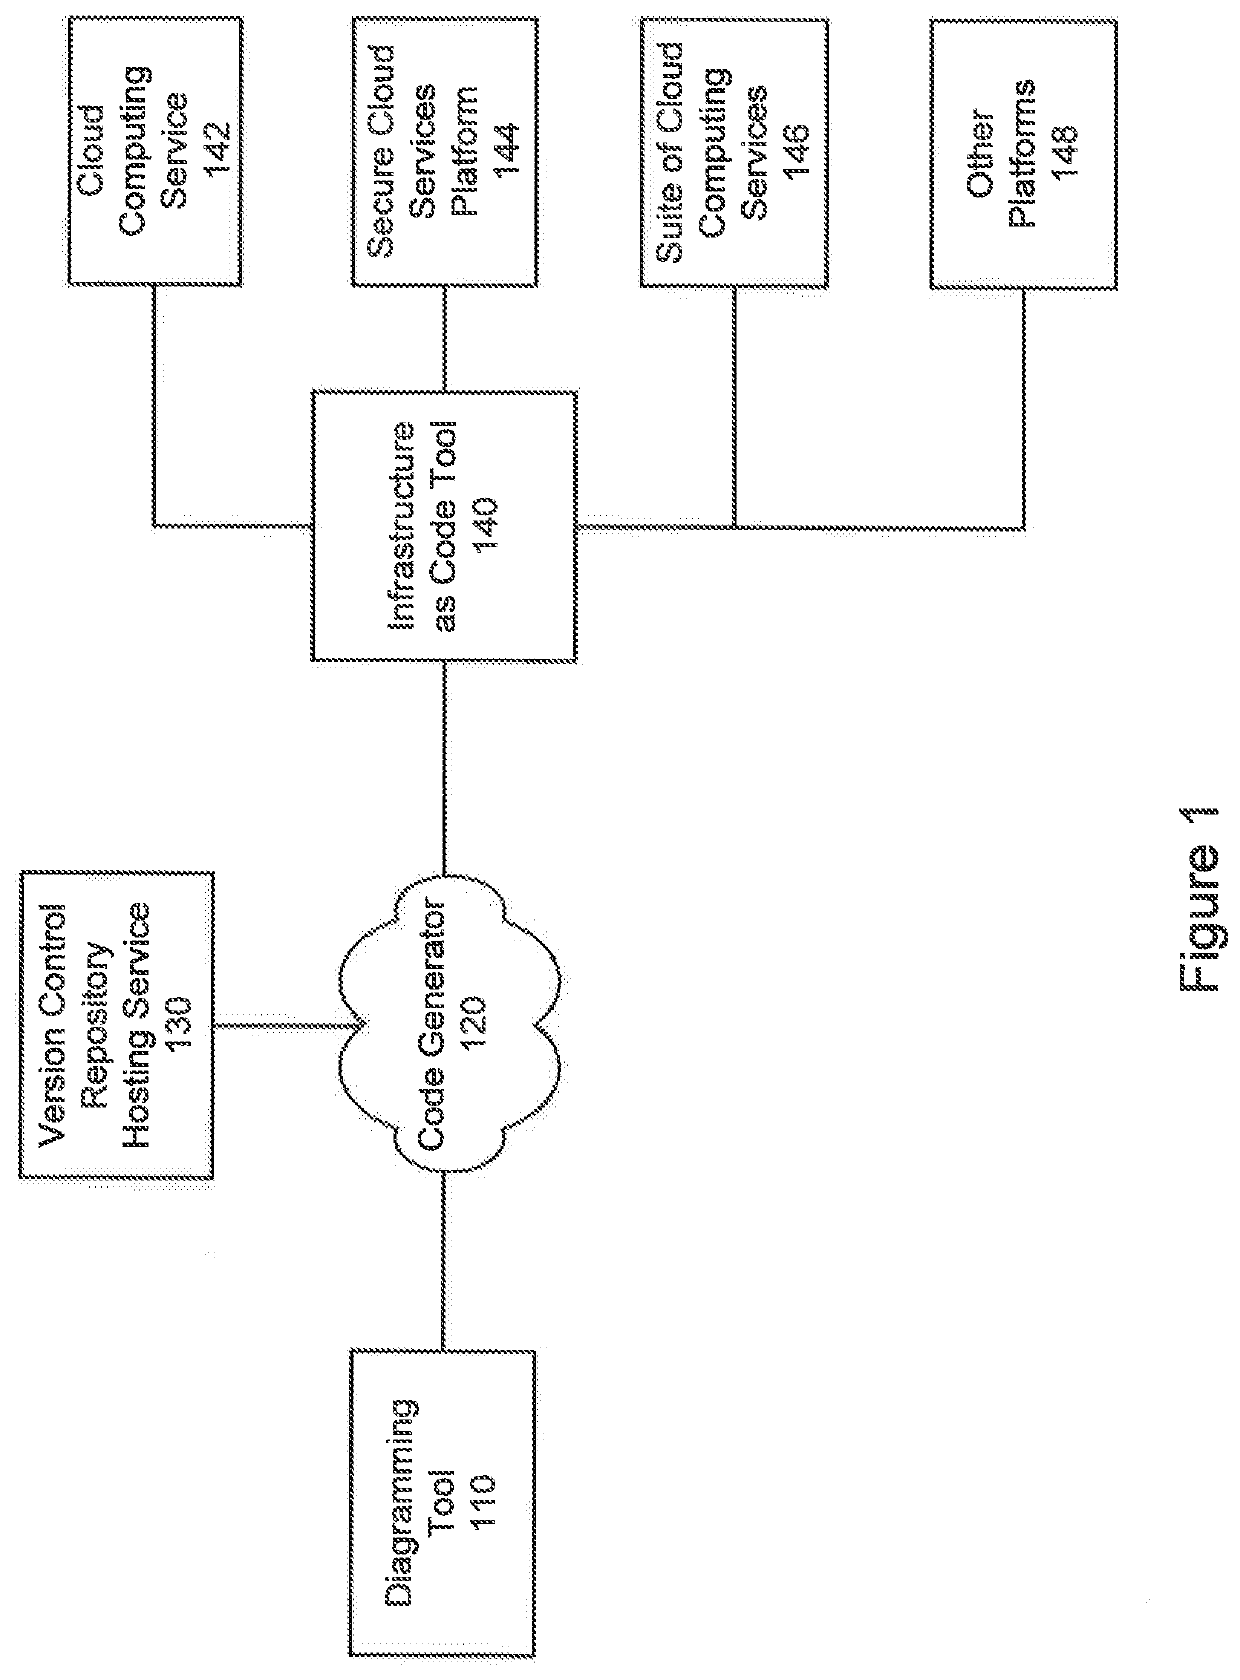 Method and system for implementing a cloud infrastructure visualizer and generator